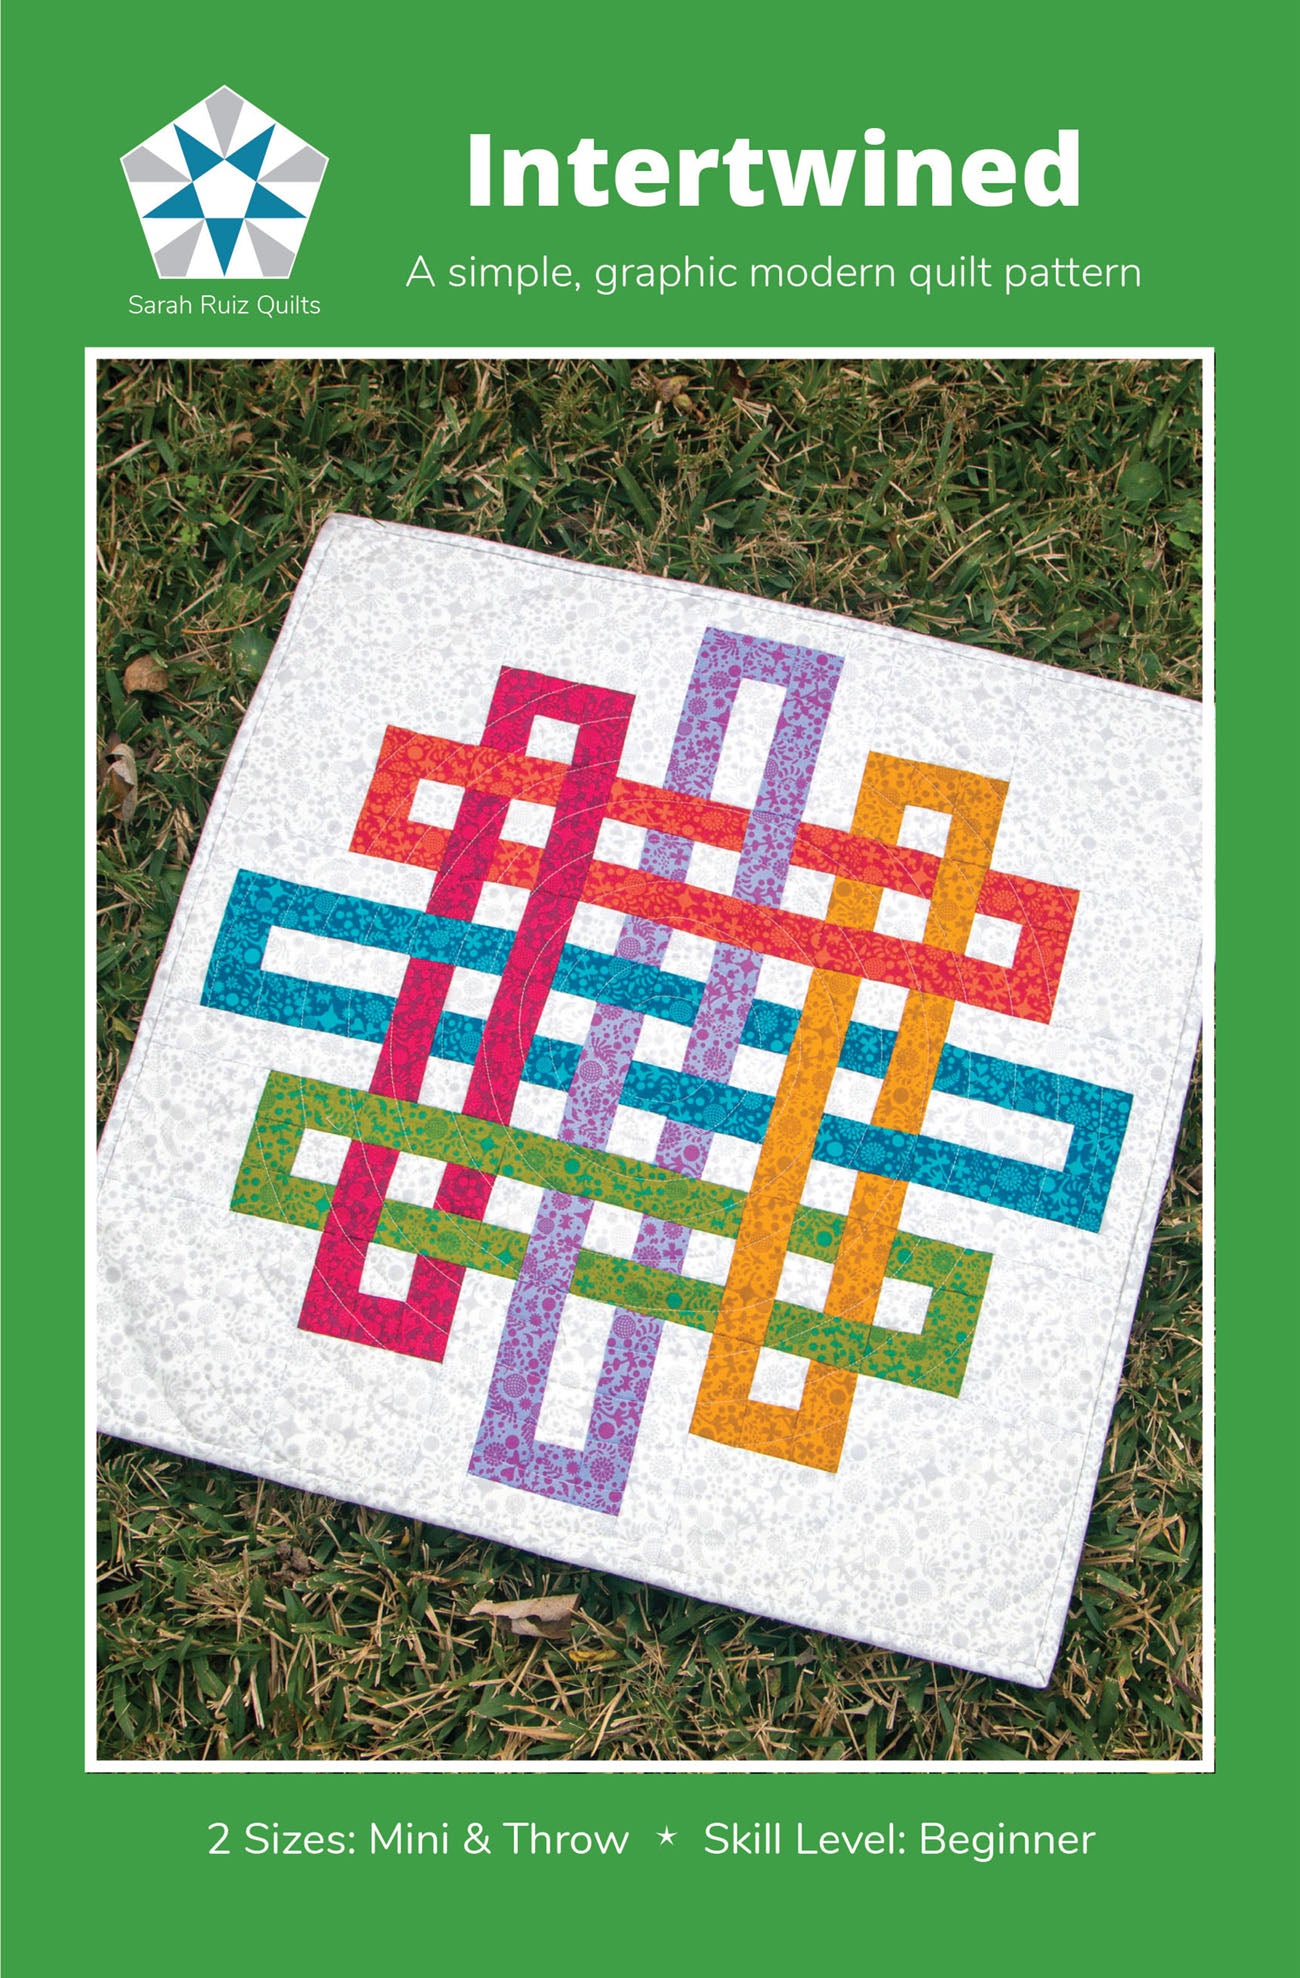 Intertwined Quilt Pattern by Sarah Ruiz Quilts